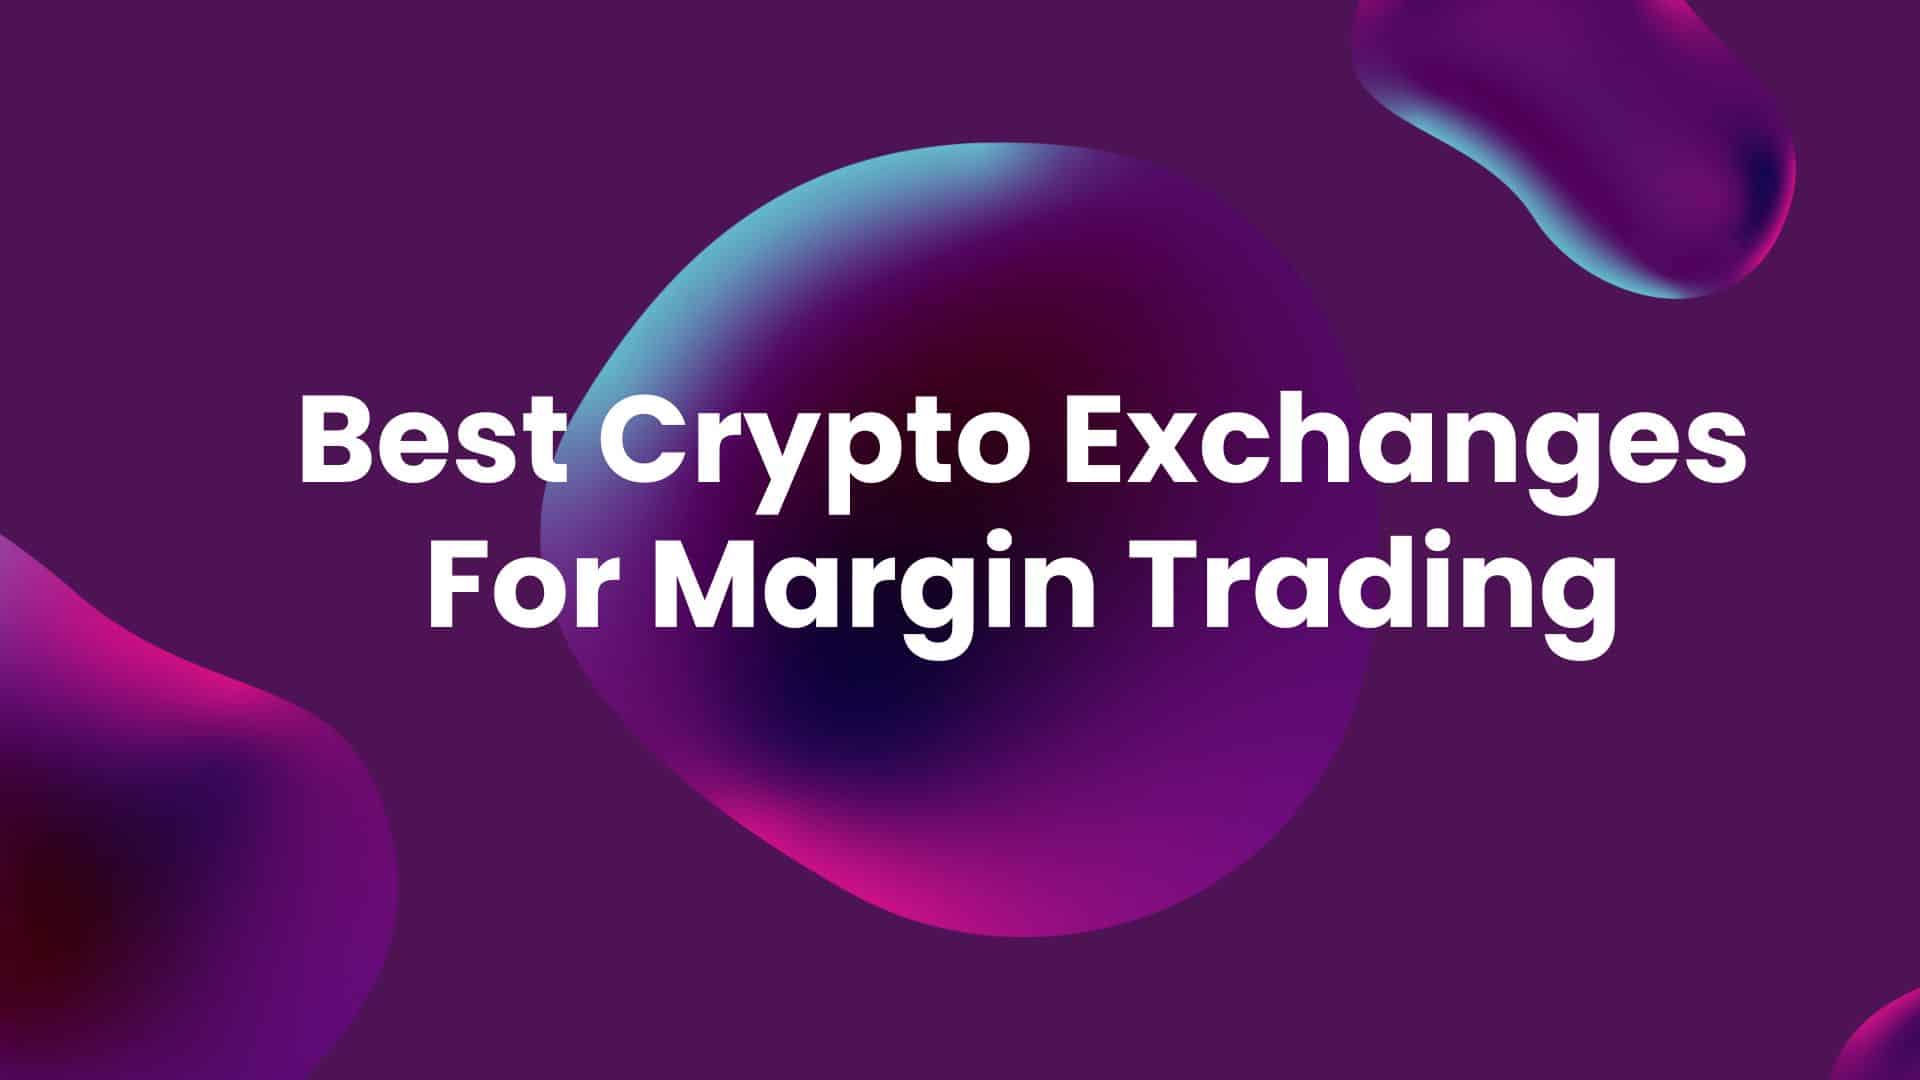 Best Crypto Exchanges For Margin Trading - Featured Image